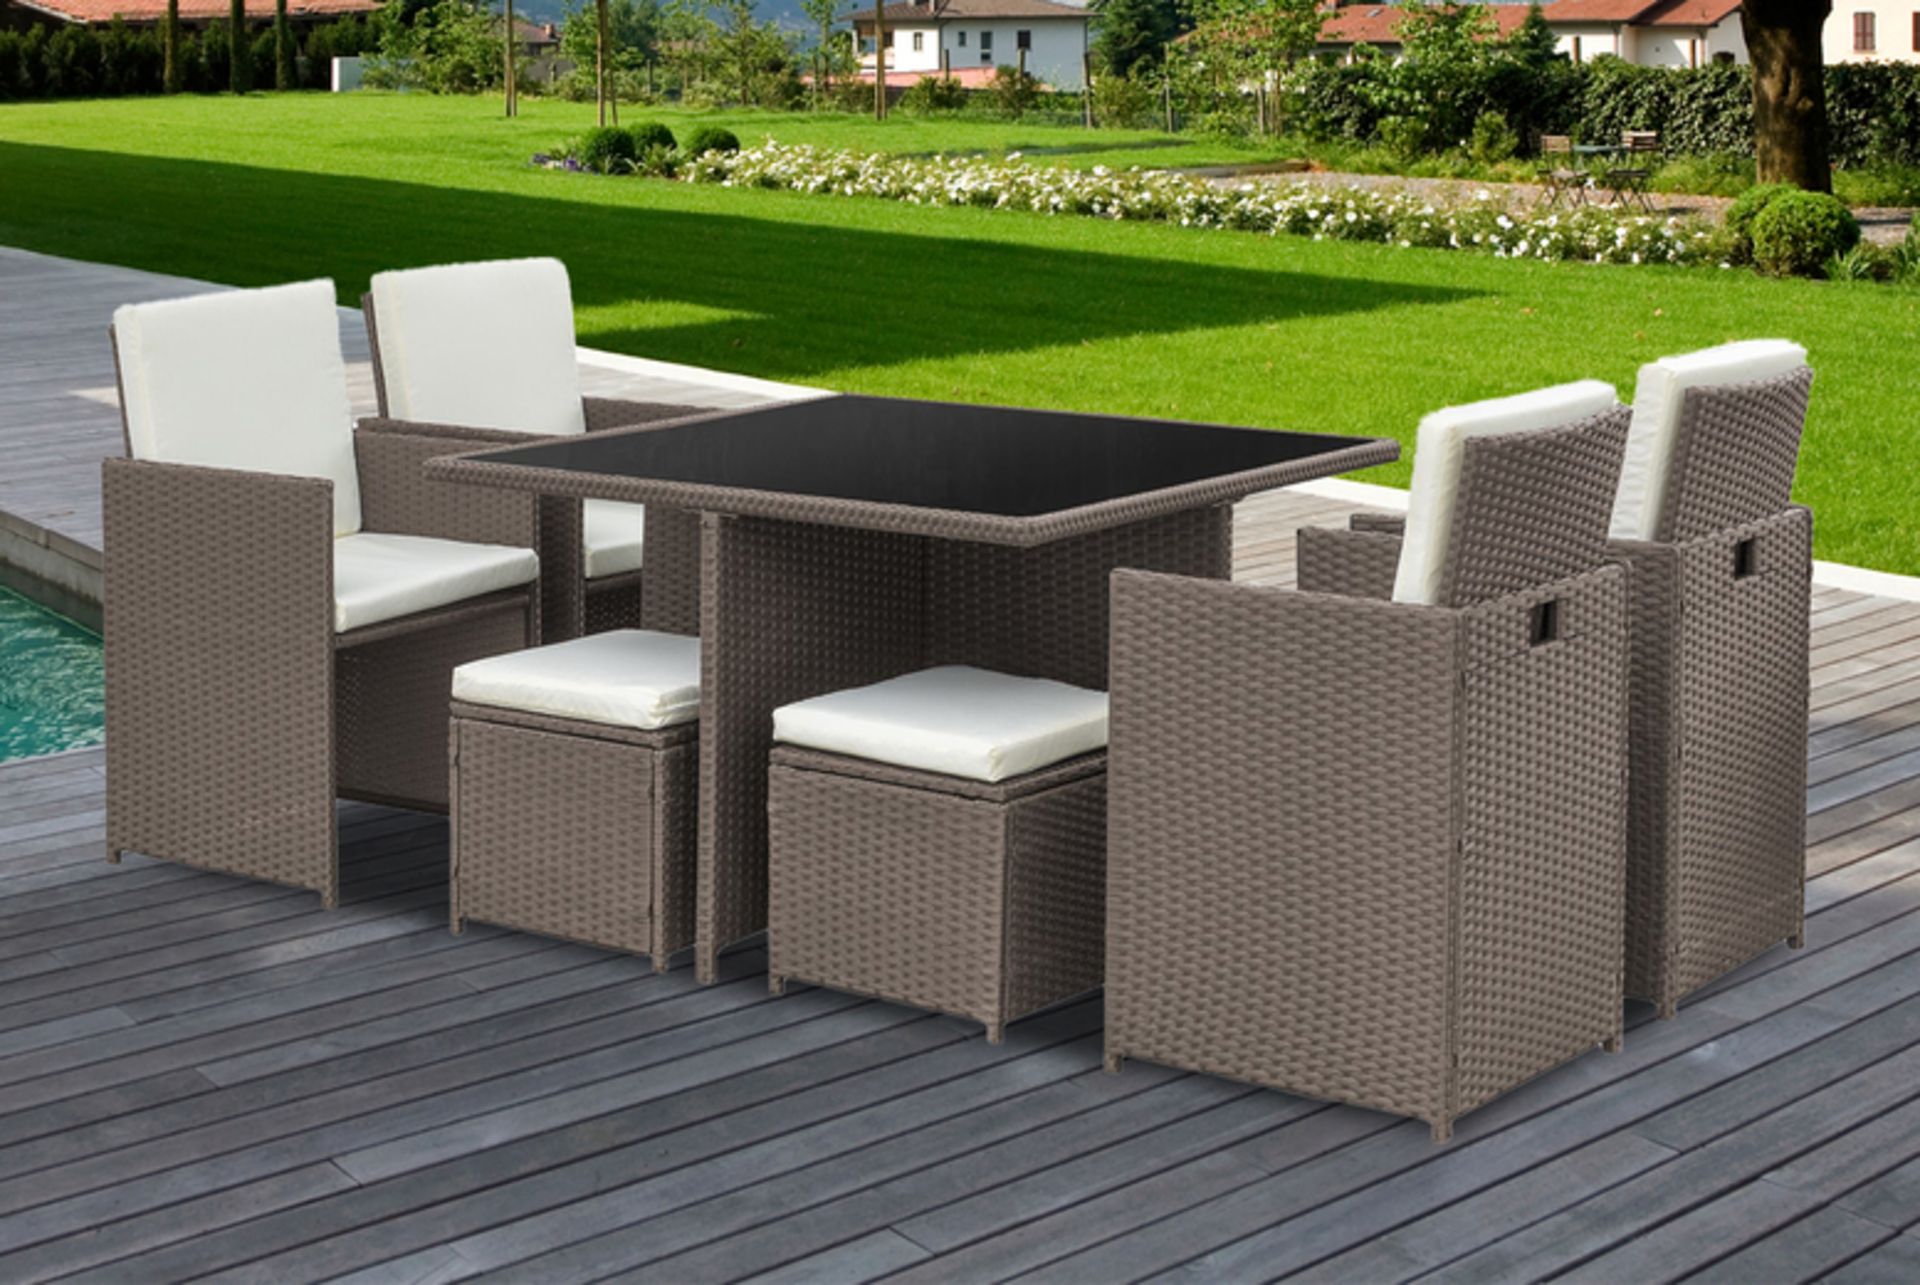 FREE DELIVERY - JOB LOT OF 5X 8-SEATER RATTAN CUBE GARDEN FURNITURE DINING SET - BROWN